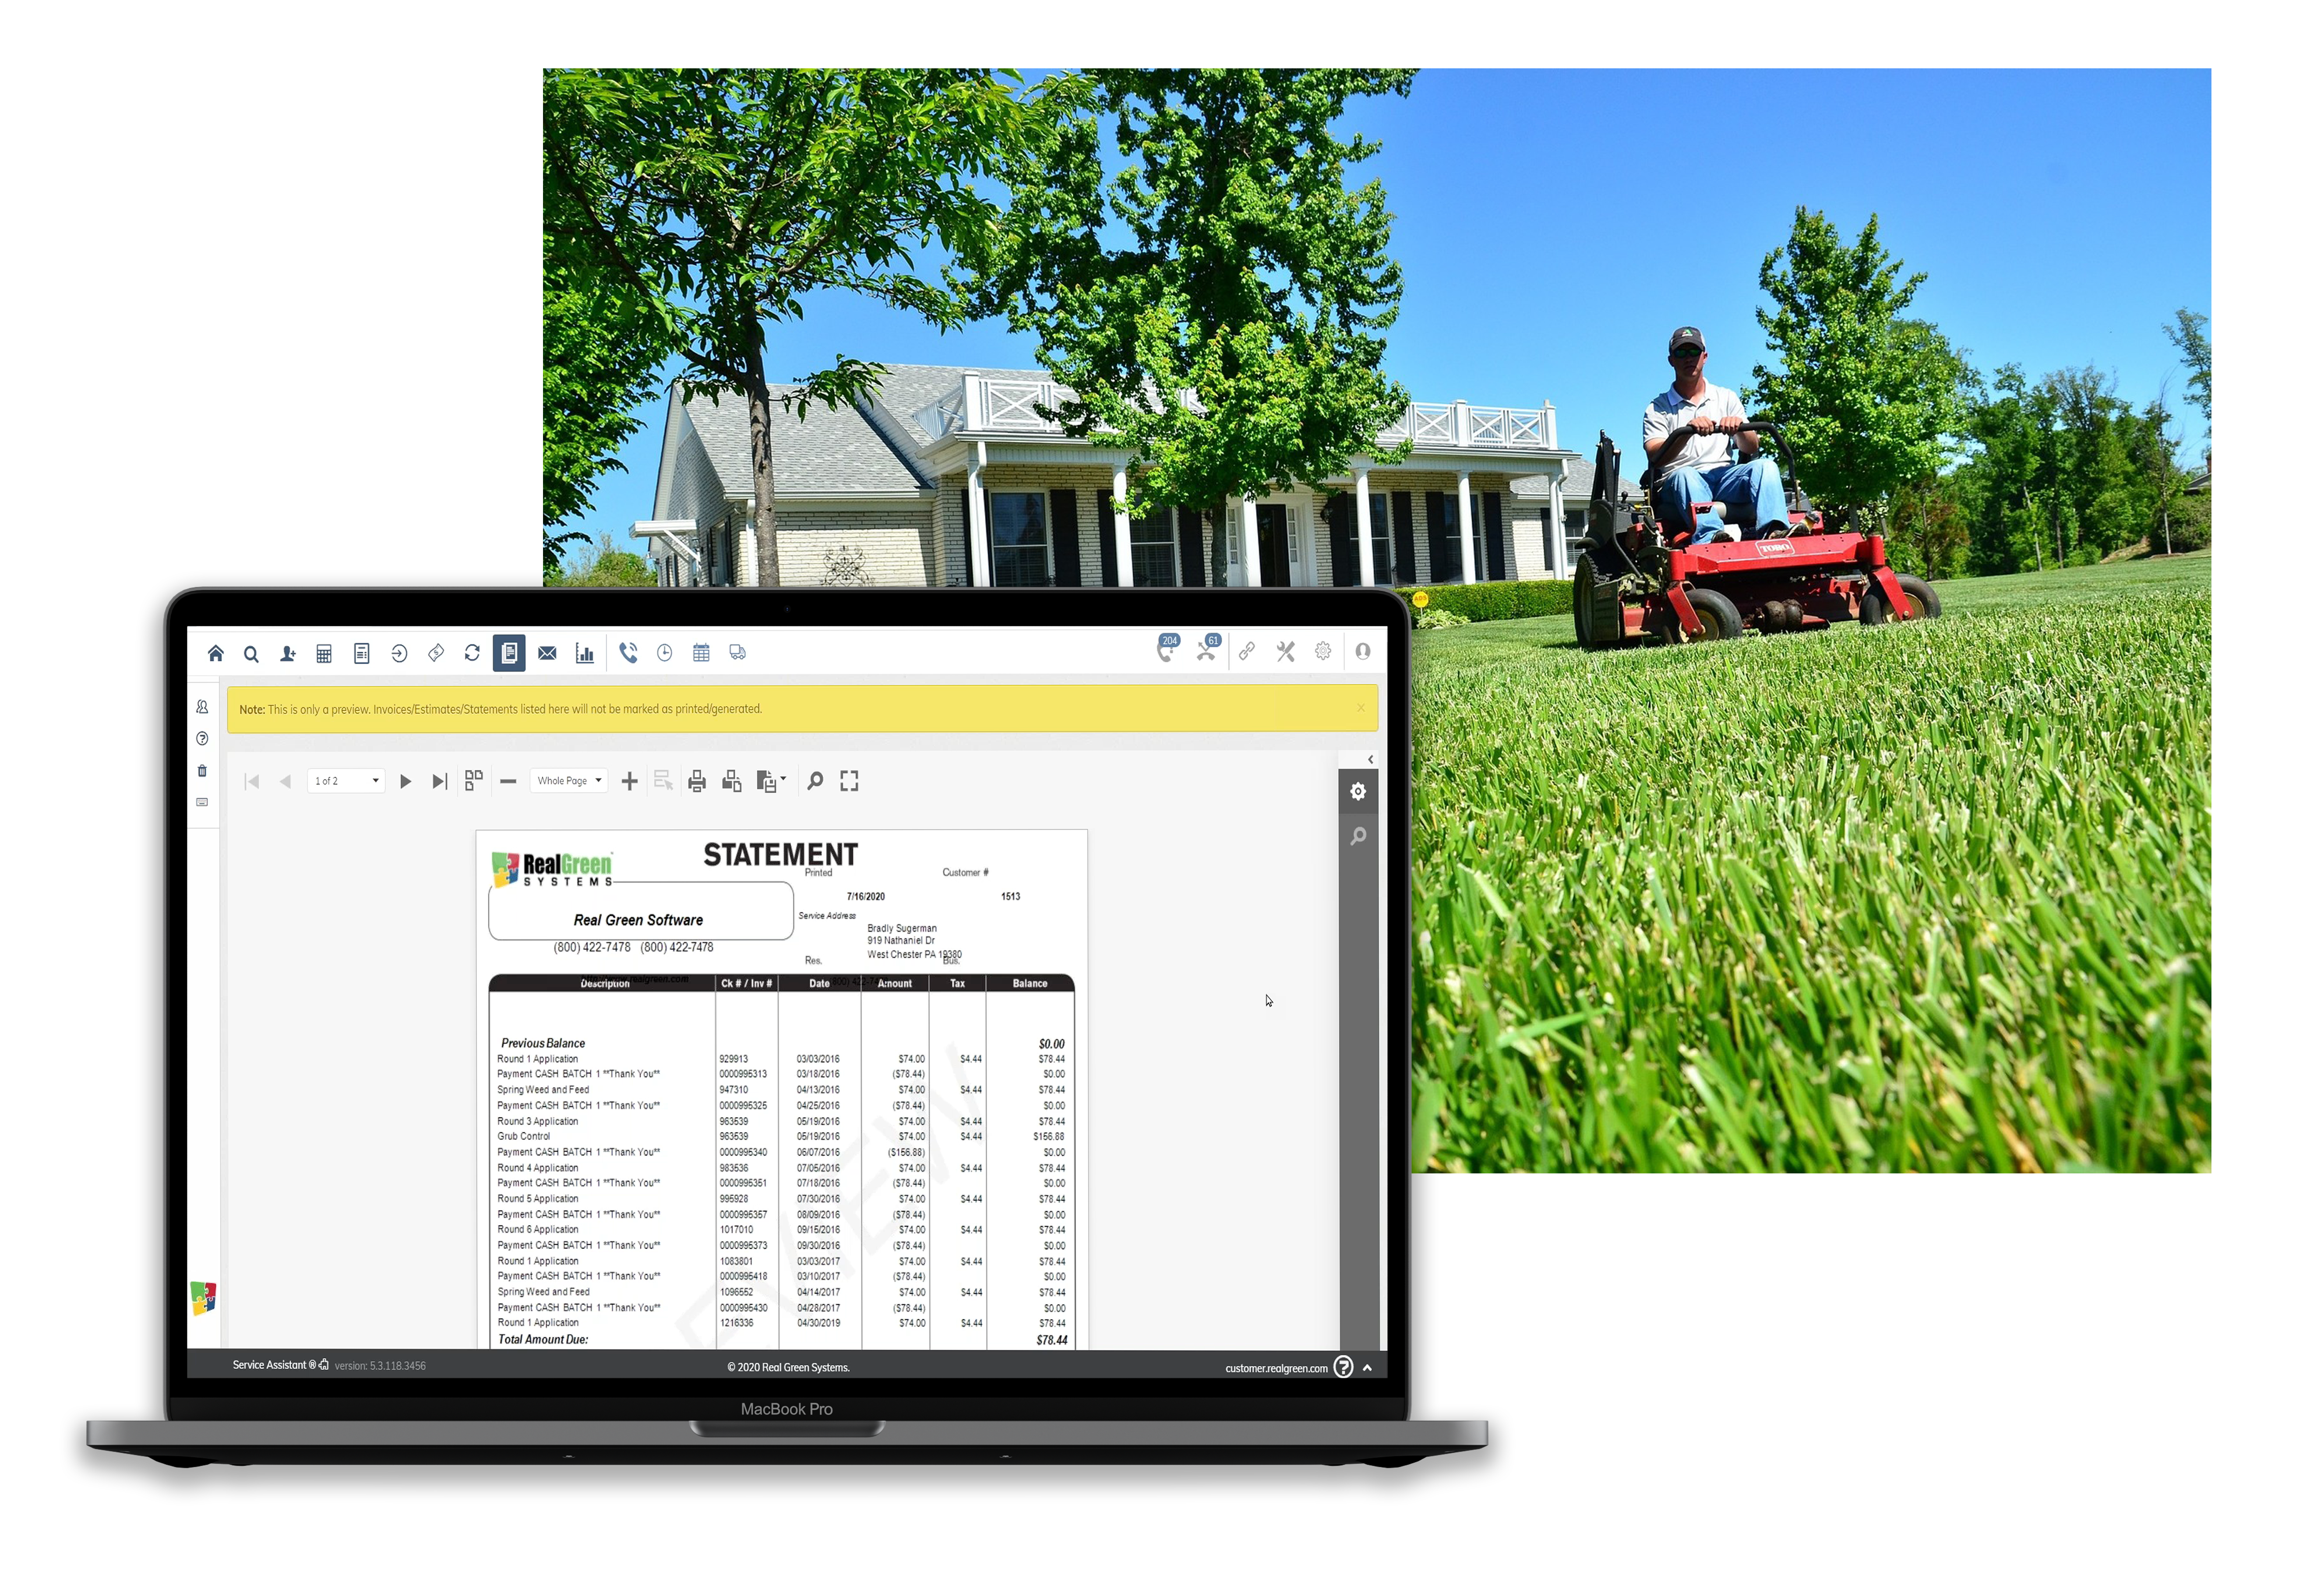 Quick and easy payment processing options for your landscaping business customers.